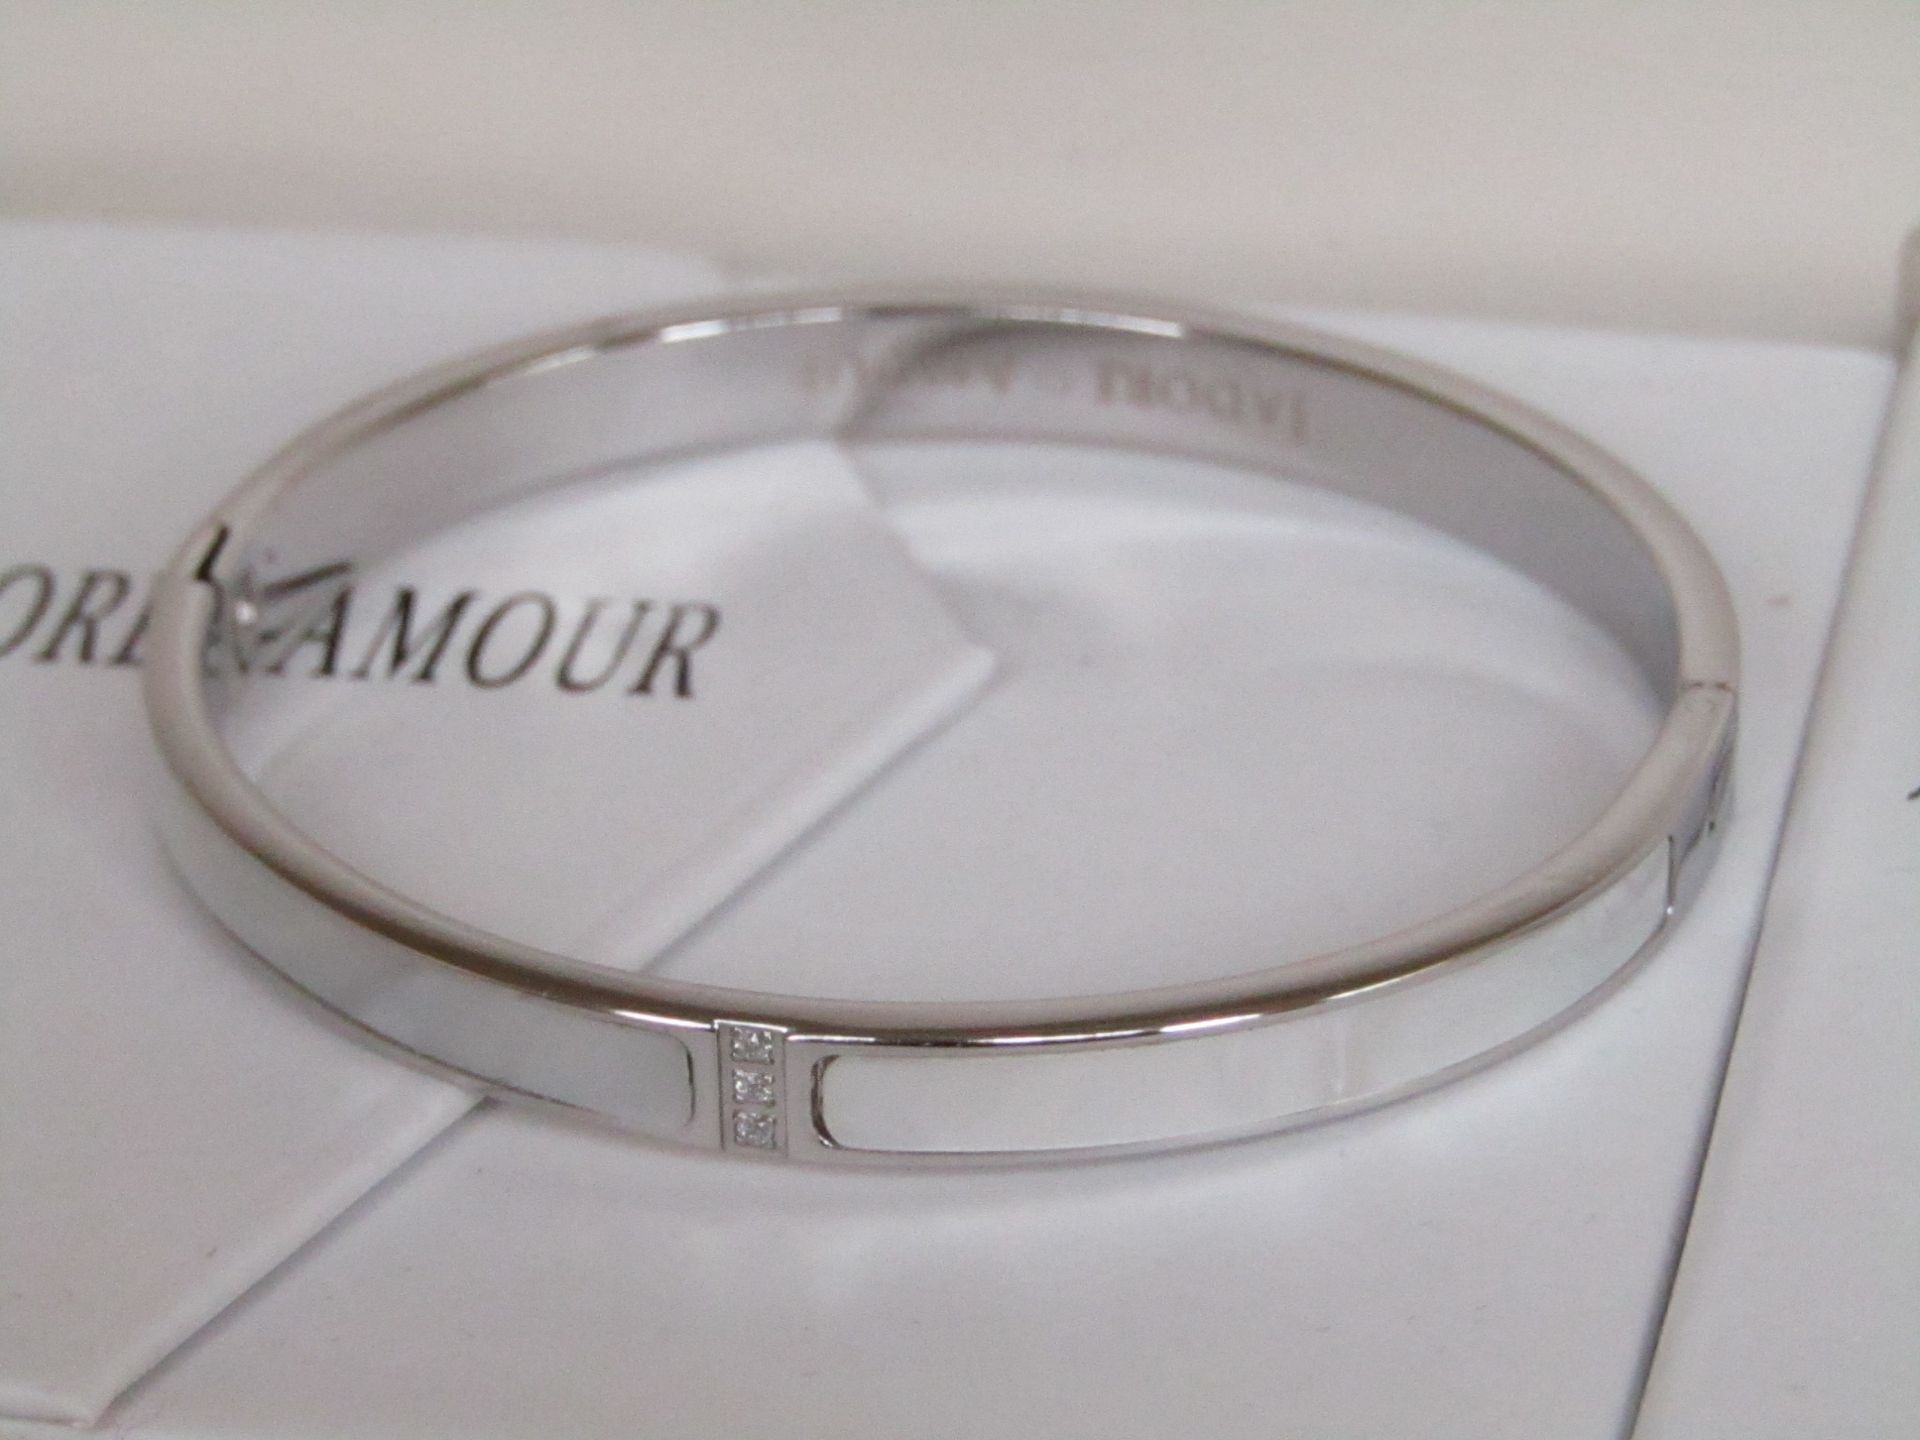 Jadore Amour Ladies Bracelet -Silver Coloured (see picture for design). New with box.